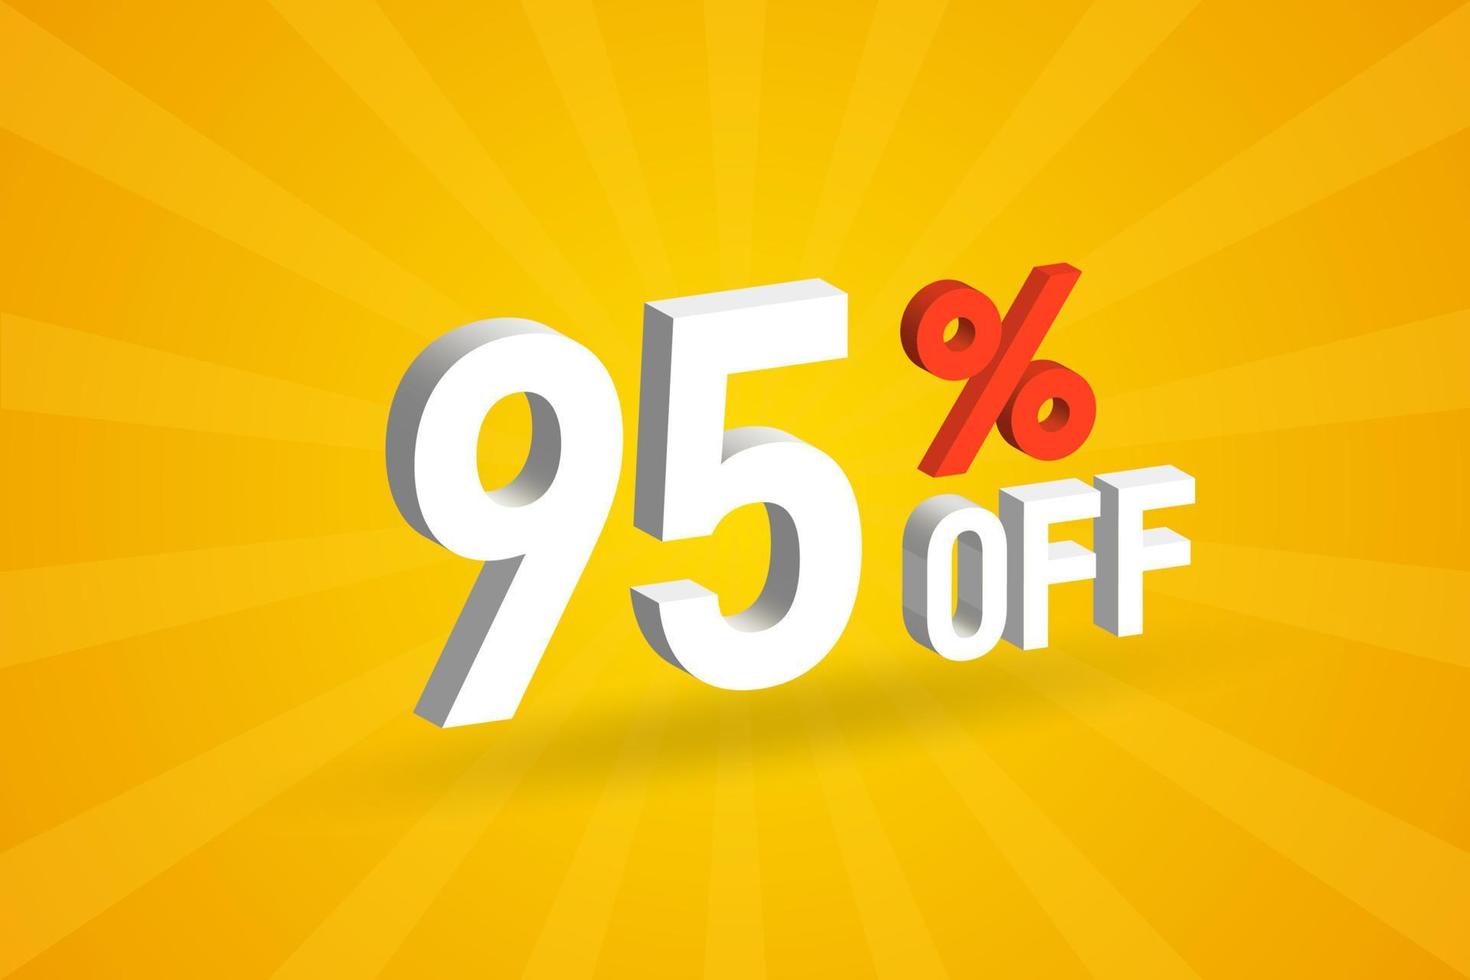 95 Percent off 3D Special promotional campaign design. 95 off 3D Discount Offer for Sale and marketing. vector